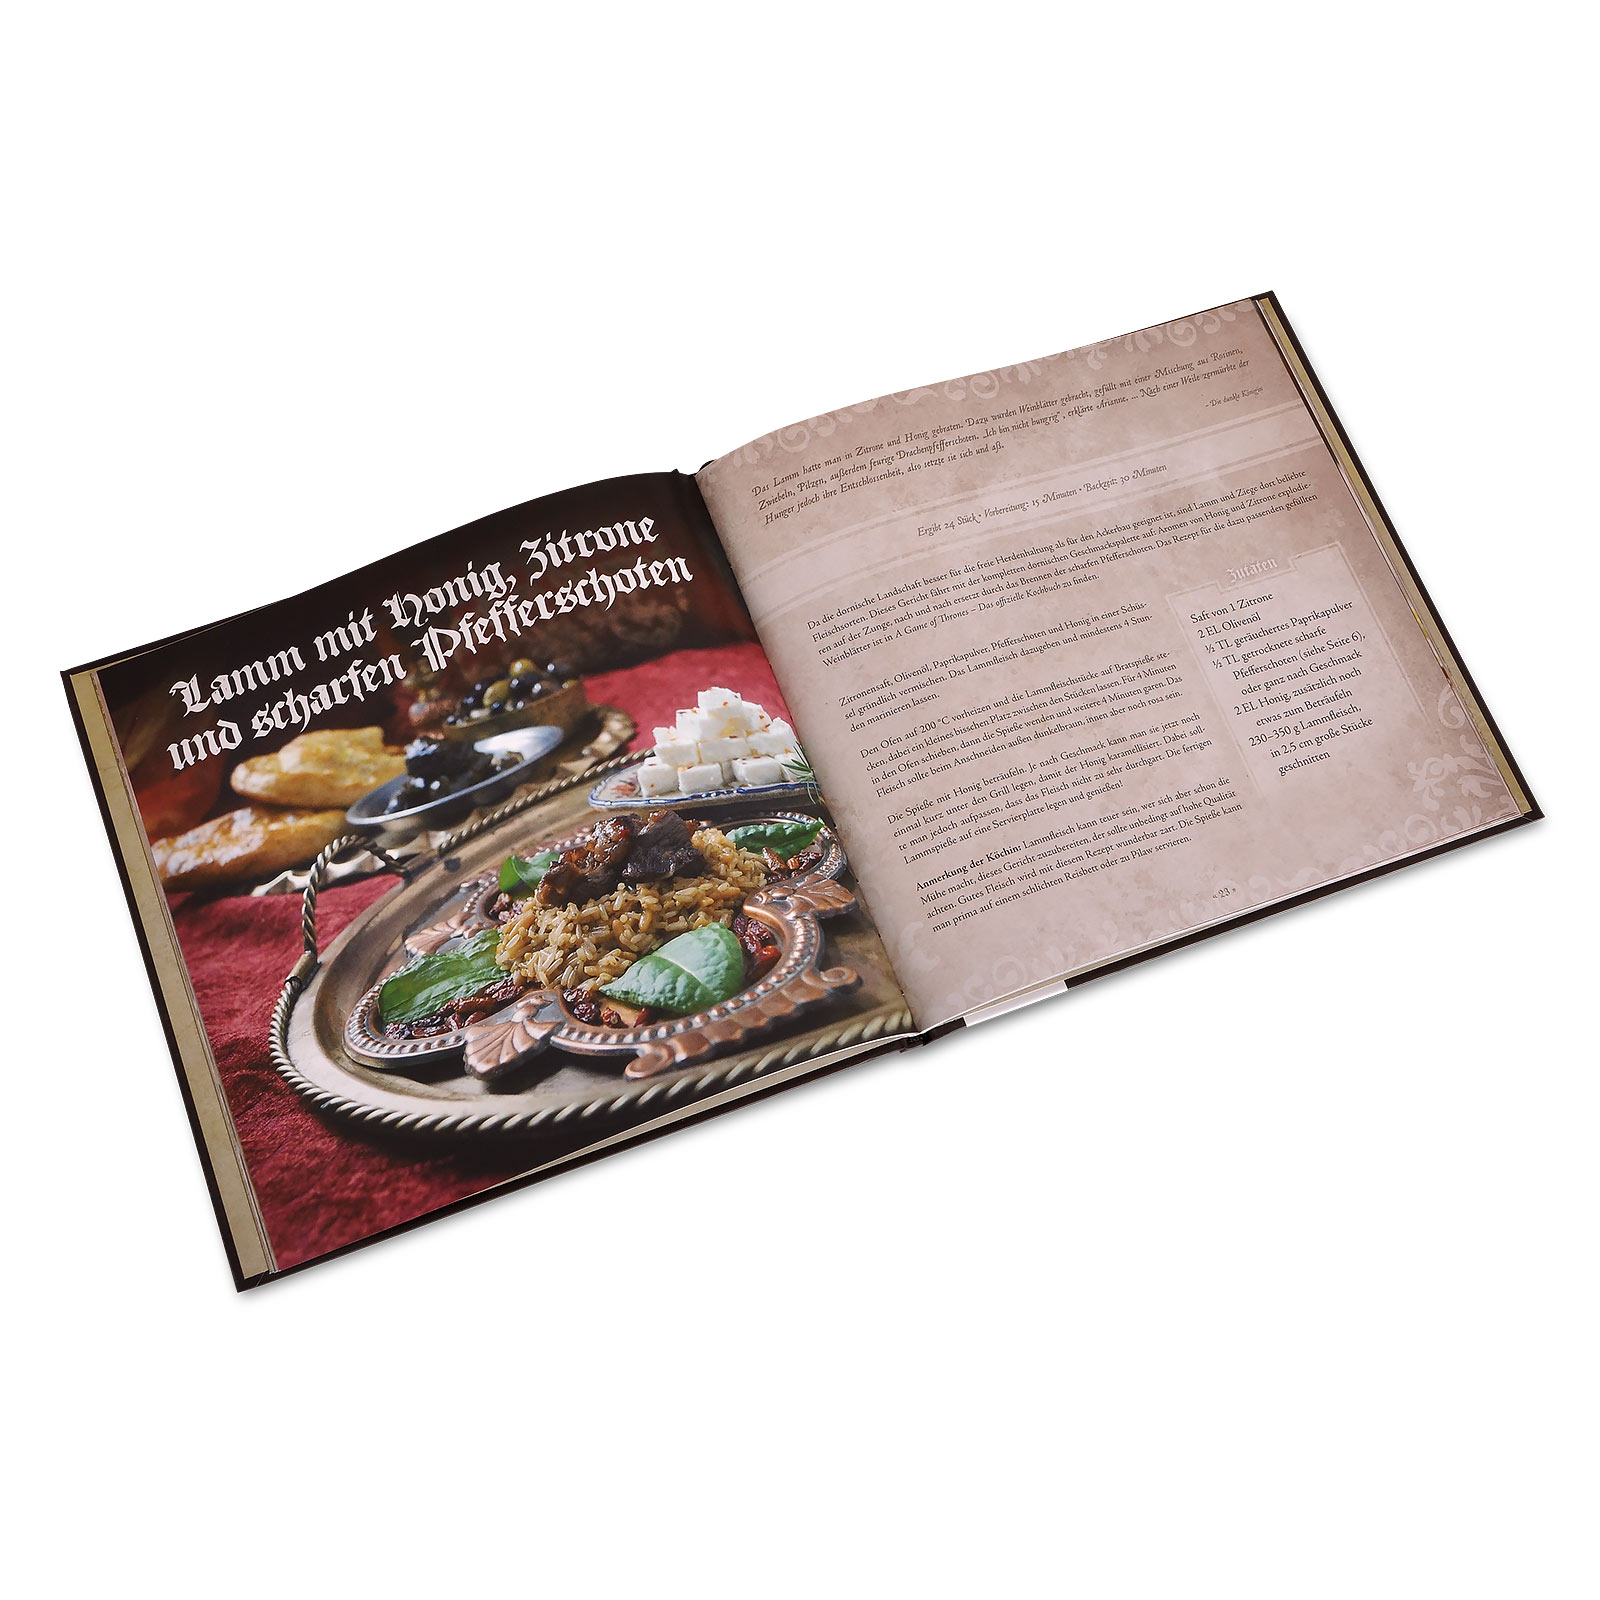 Game of Thrones - From the Sands of Dorne Cookbook Supplement